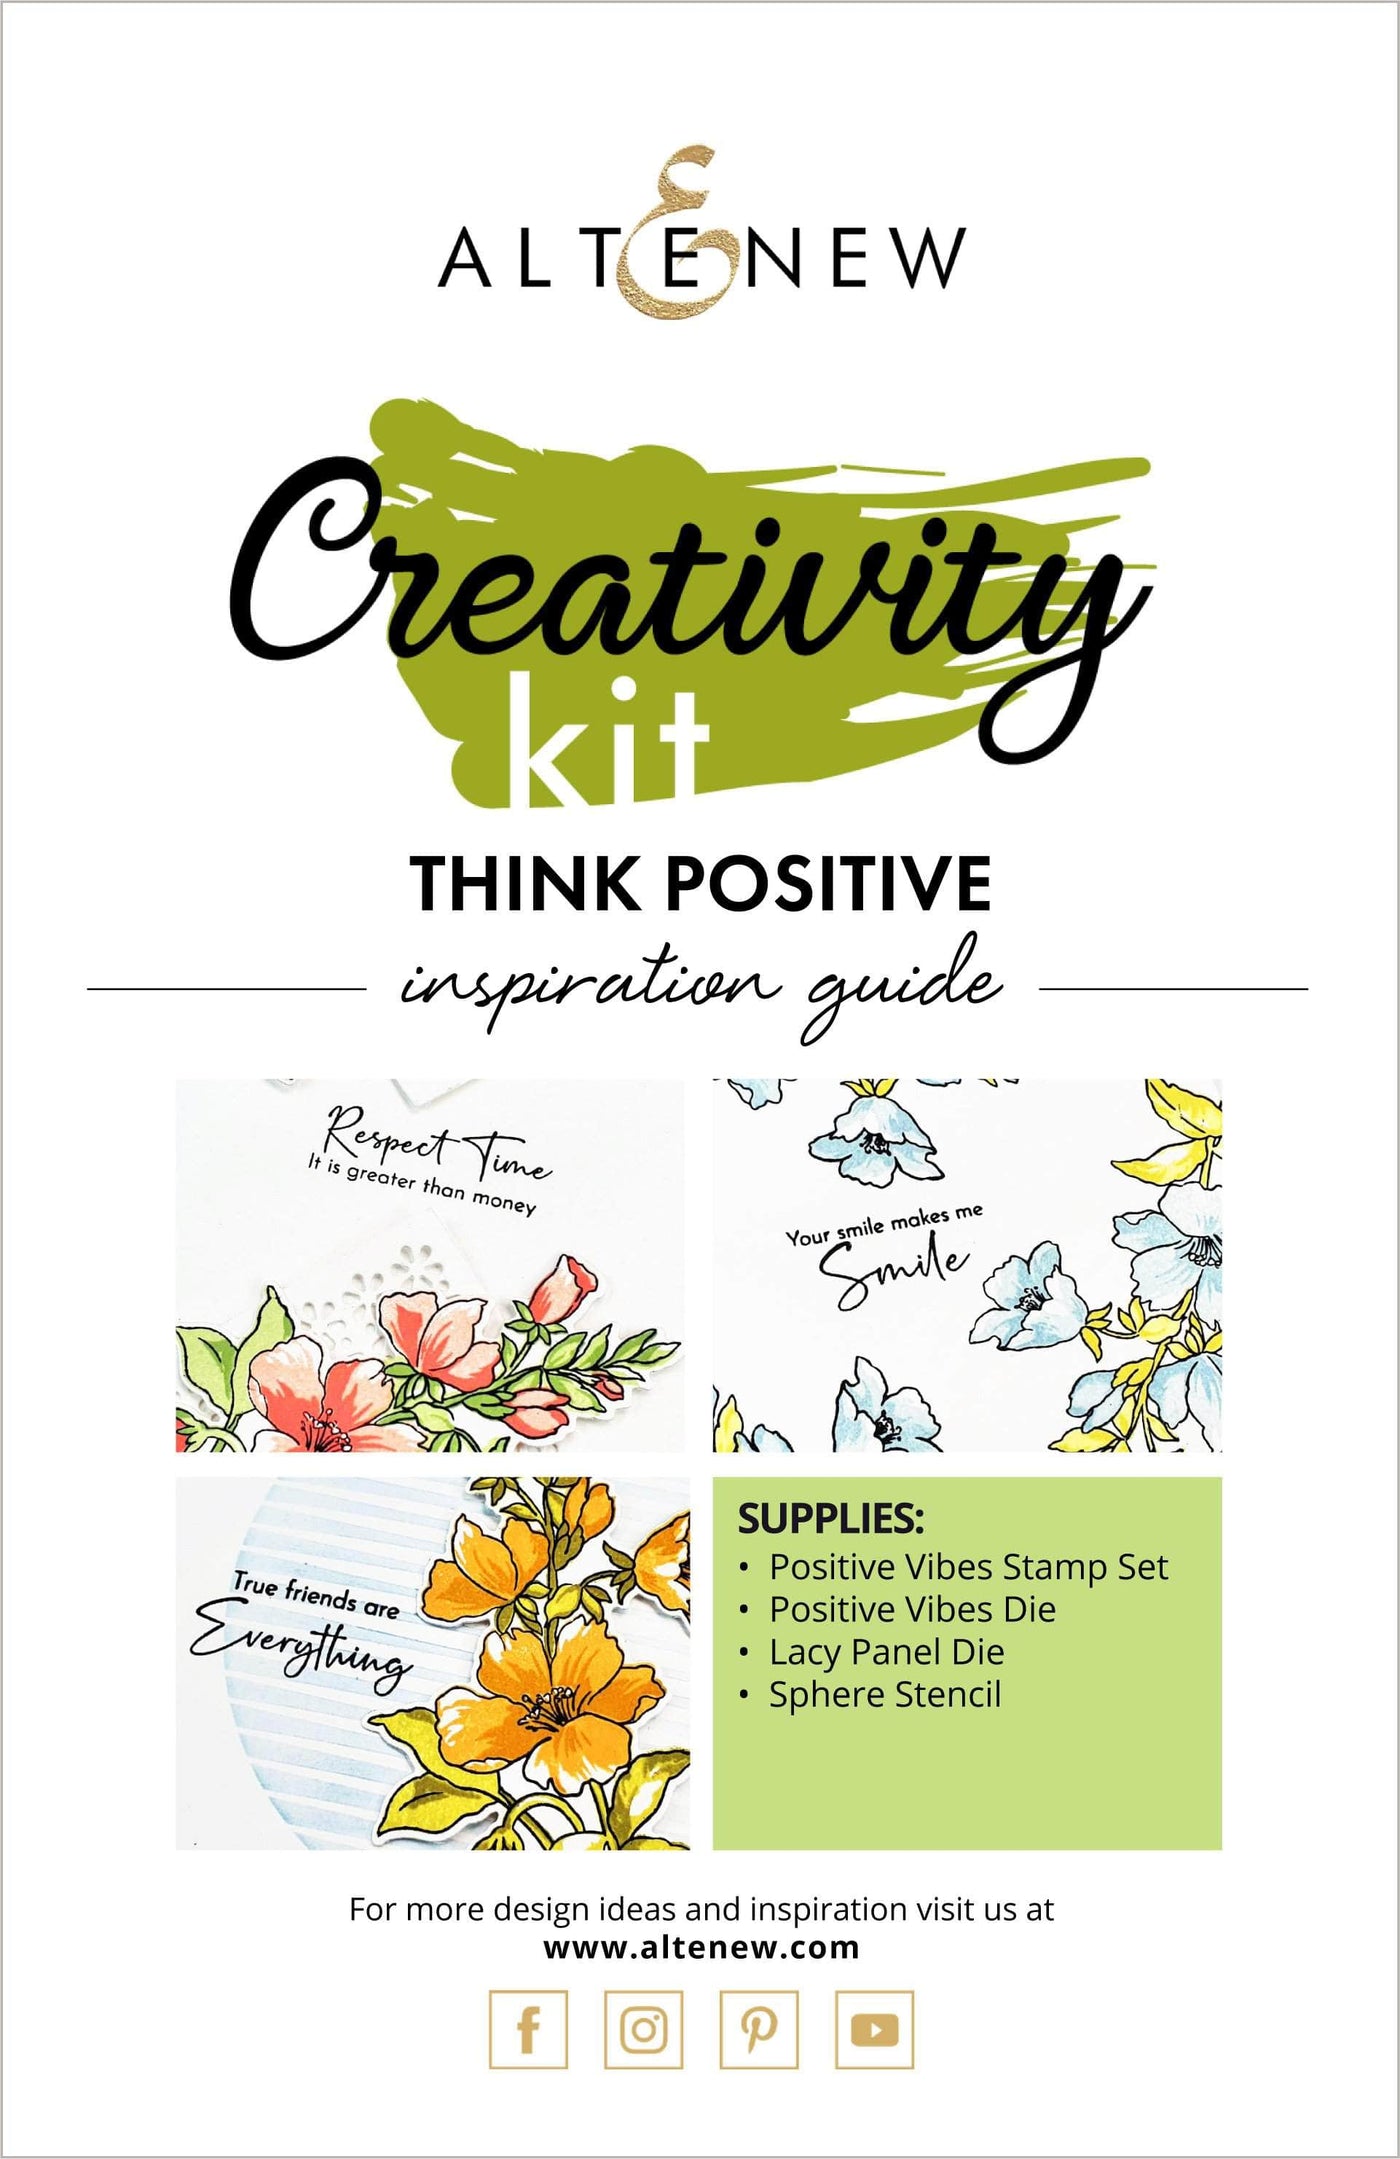 Printed Media Think Positive Creativity Cardmaking Kit Inspiration Guide